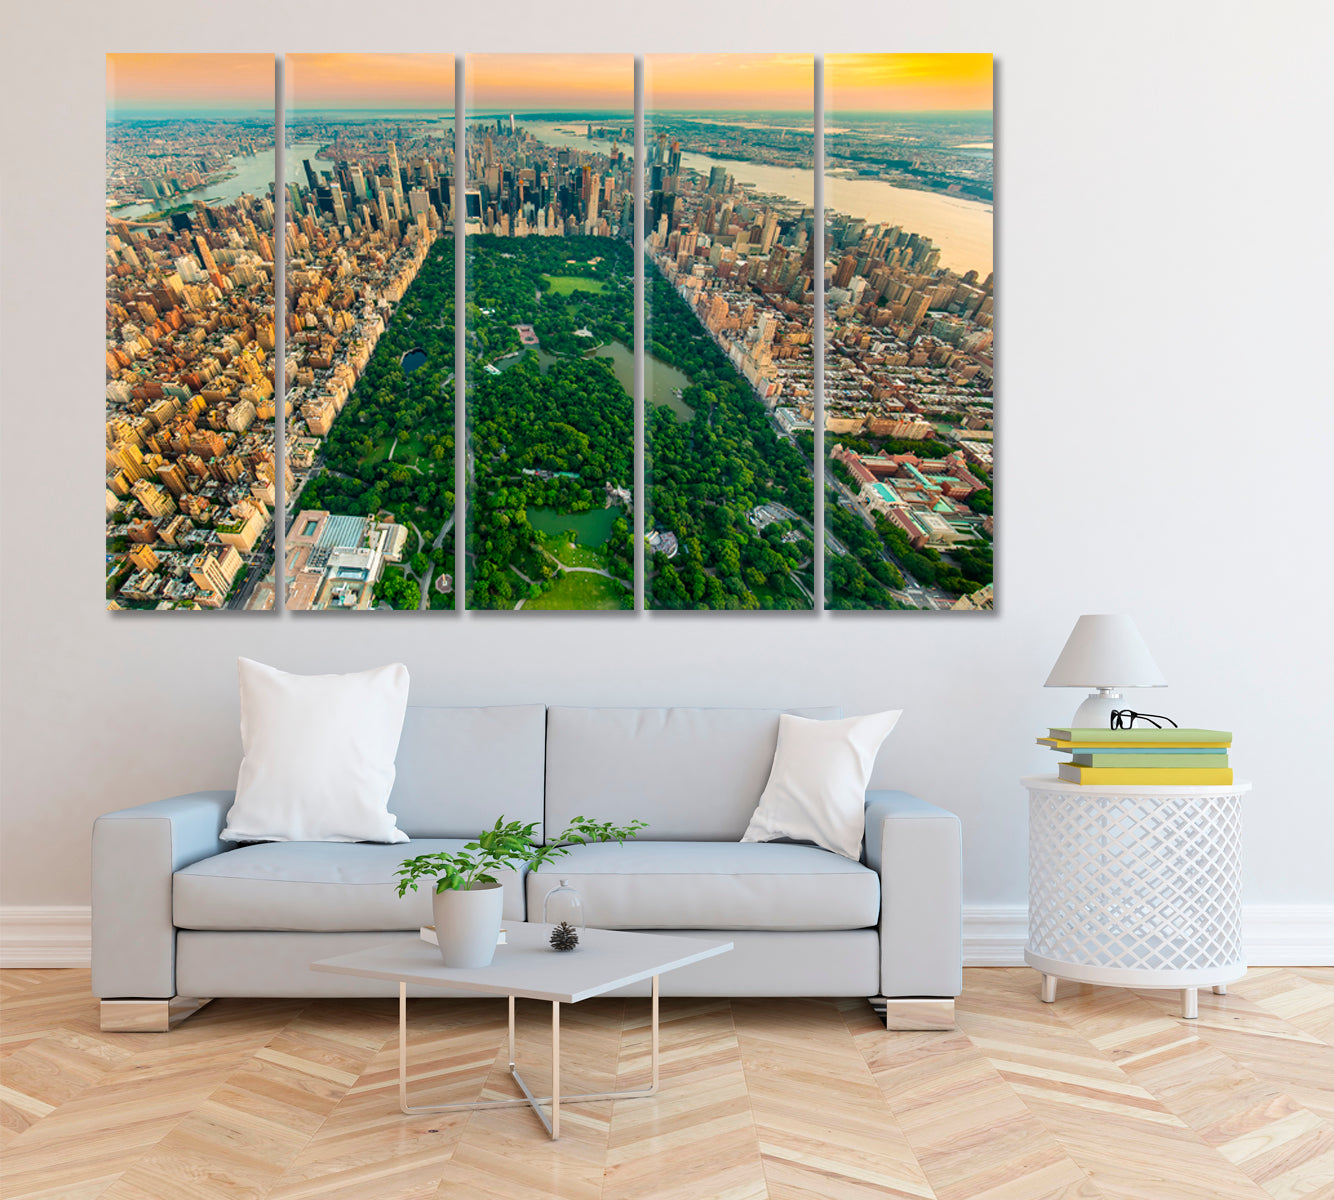 New York Central Park Canvas Print ArtLexy 5 Panels 36"x24" inches 